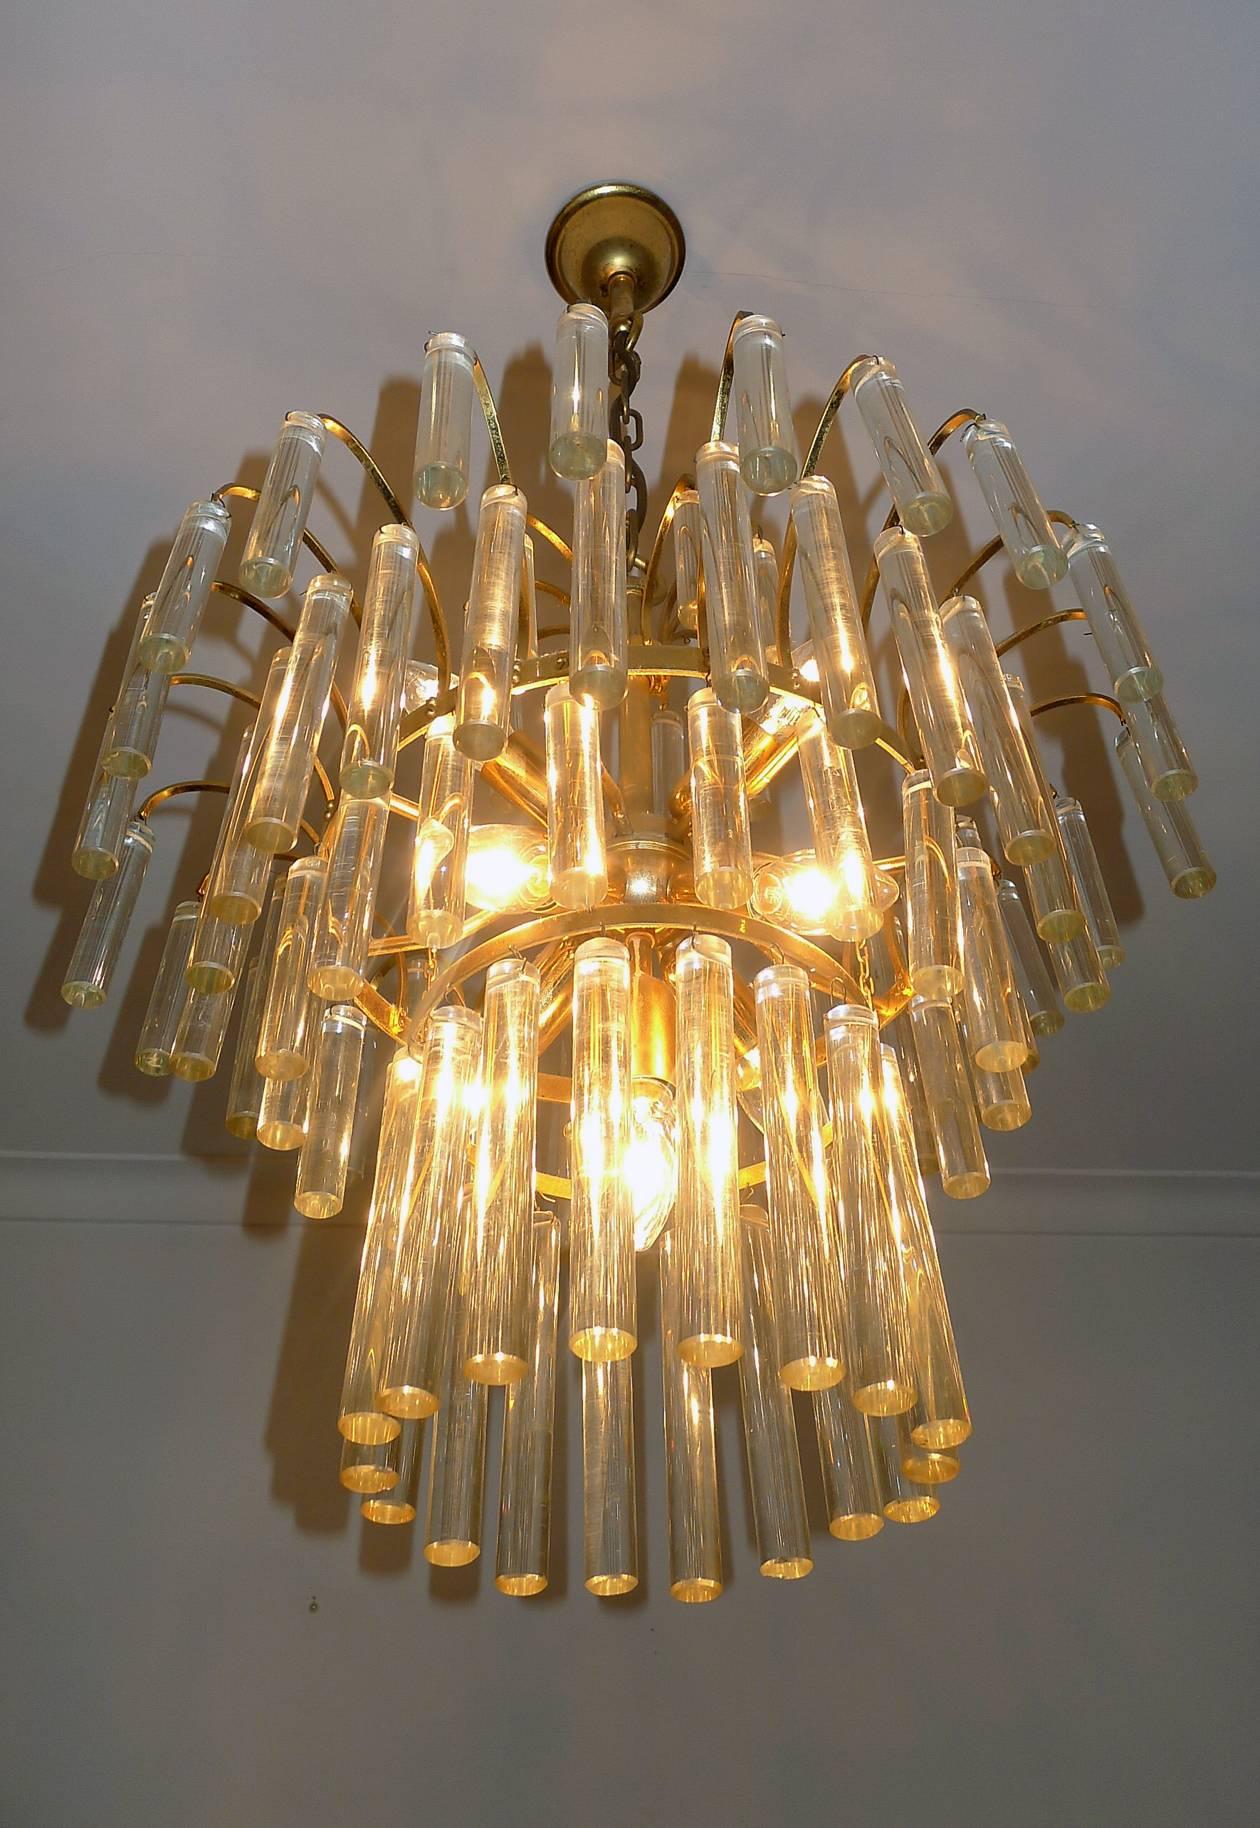 Large Venini Camer Midcentury Gilt Brass 94 Crystal Rods Waterfall Chandelier For Sale 5